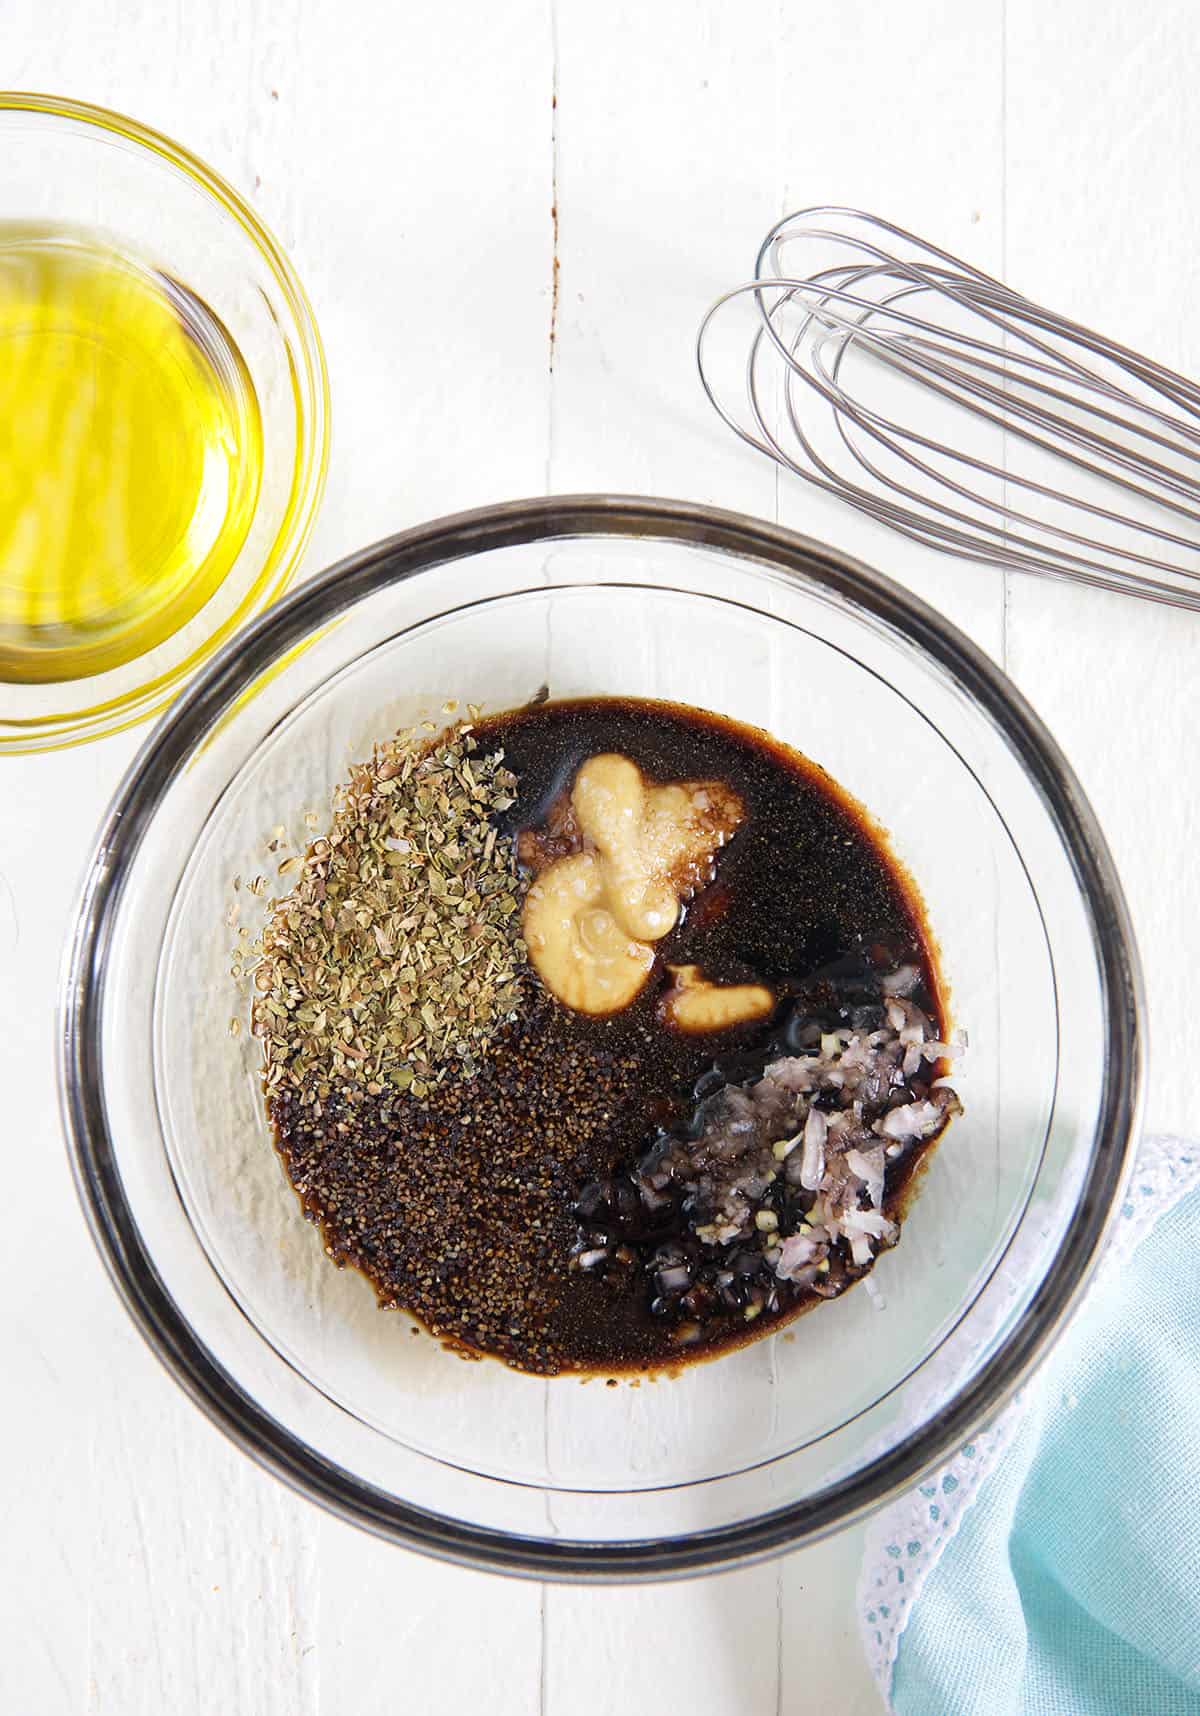 A glass bowl is filled with the ingredients for balsamic vinaigrette that have not yet been mixed.